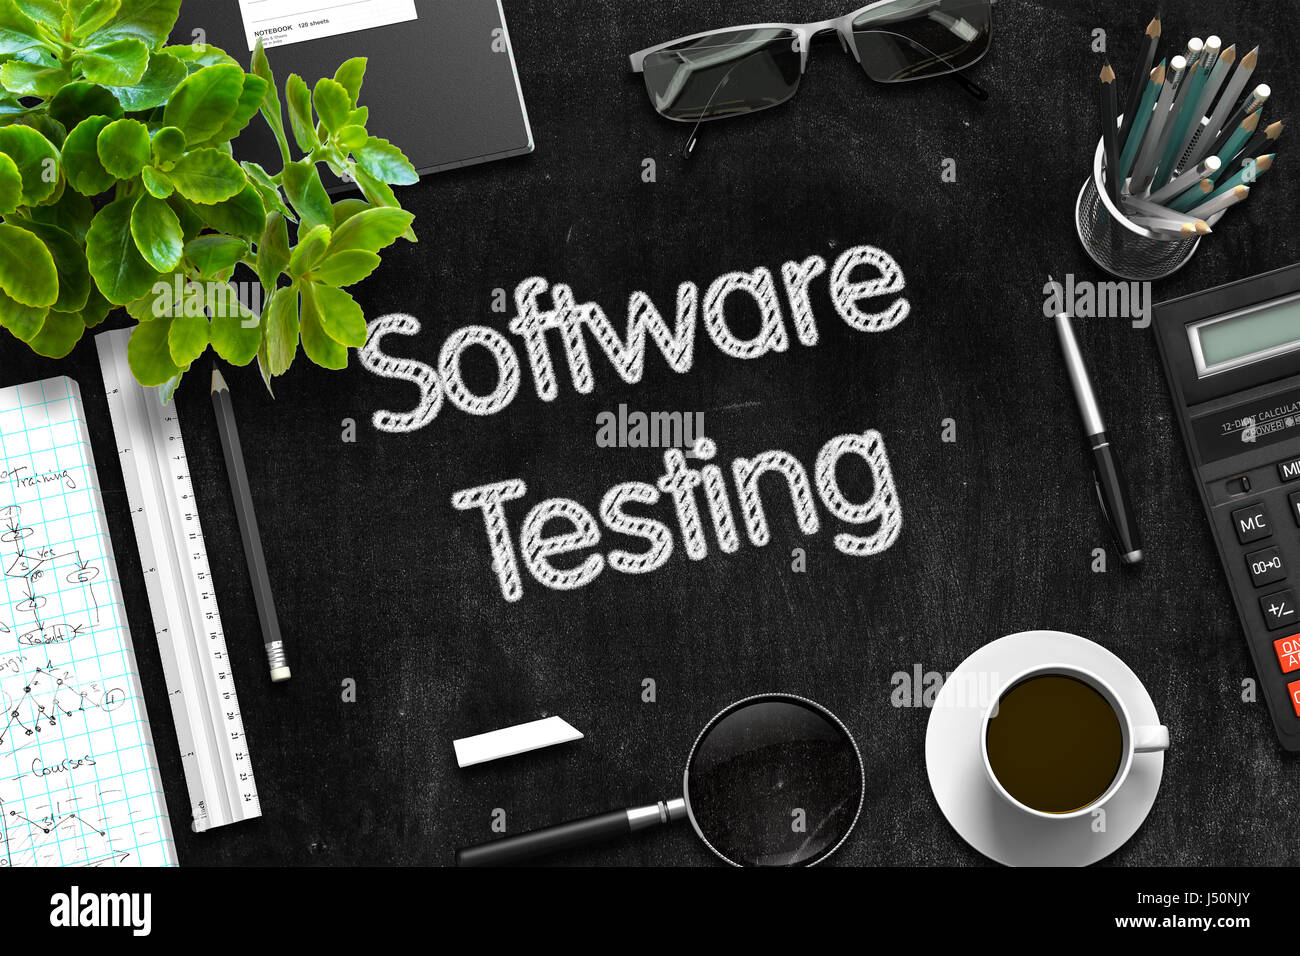 Software Testing Concept on Black Chalkboard. 3D Rendering. Stock Photo